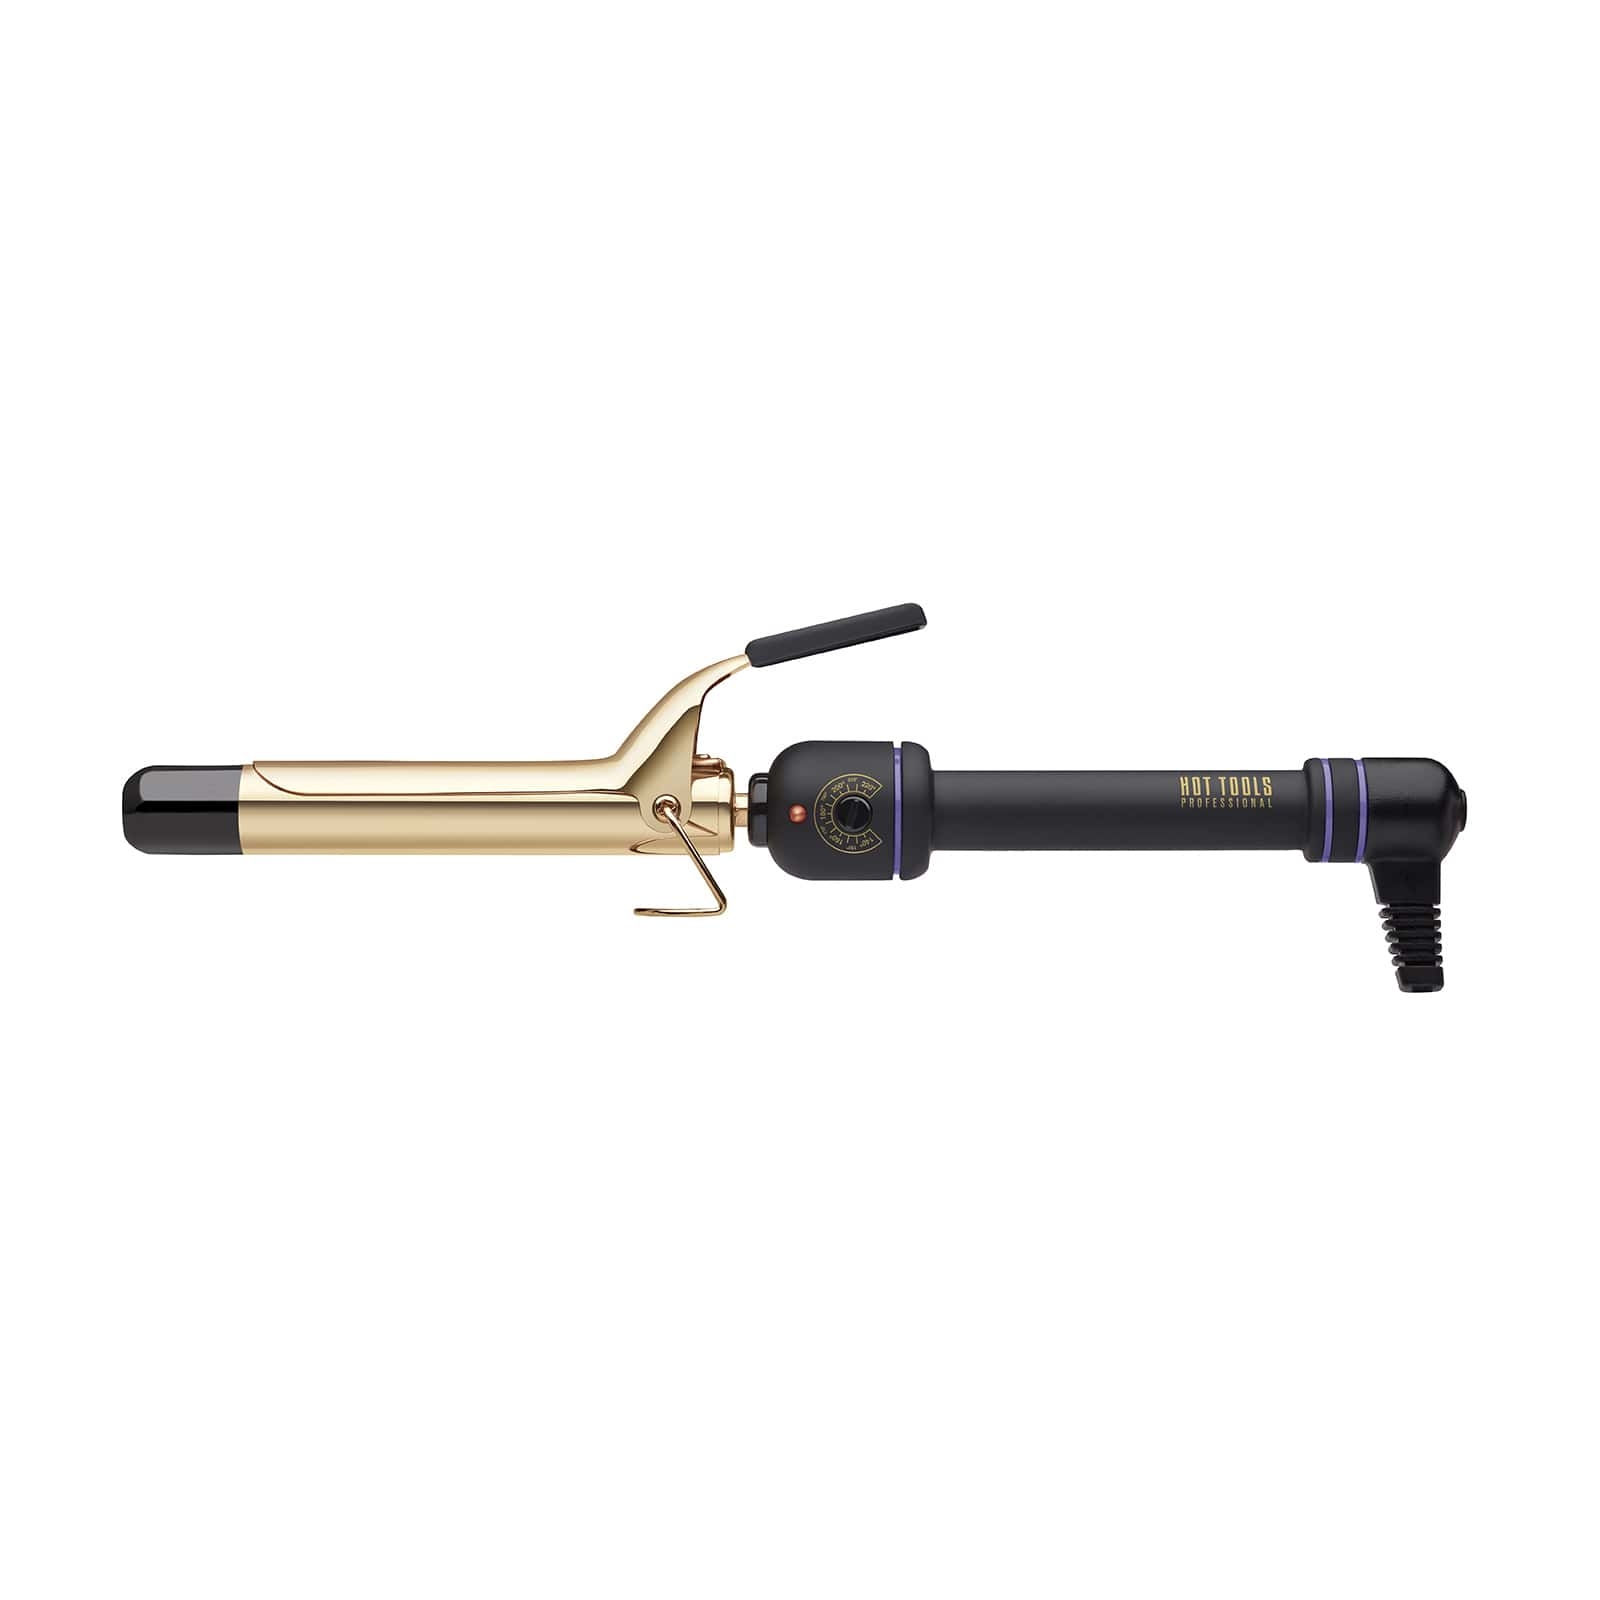 Hot Tools 24k Gold Curling Iron 25mm